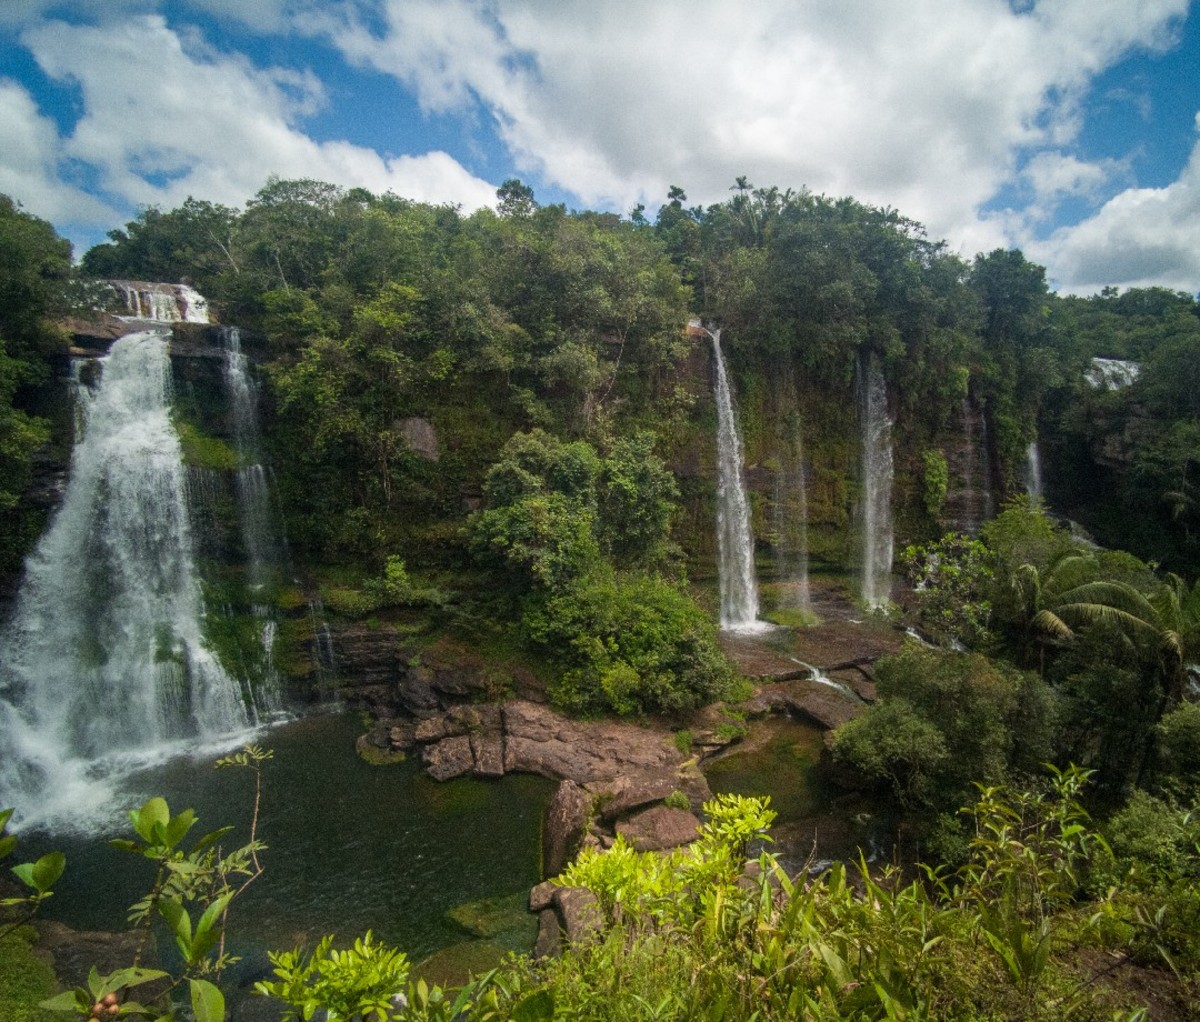 Series of waterfalls spill over a rain forest cliff in Colombia's Meta district.